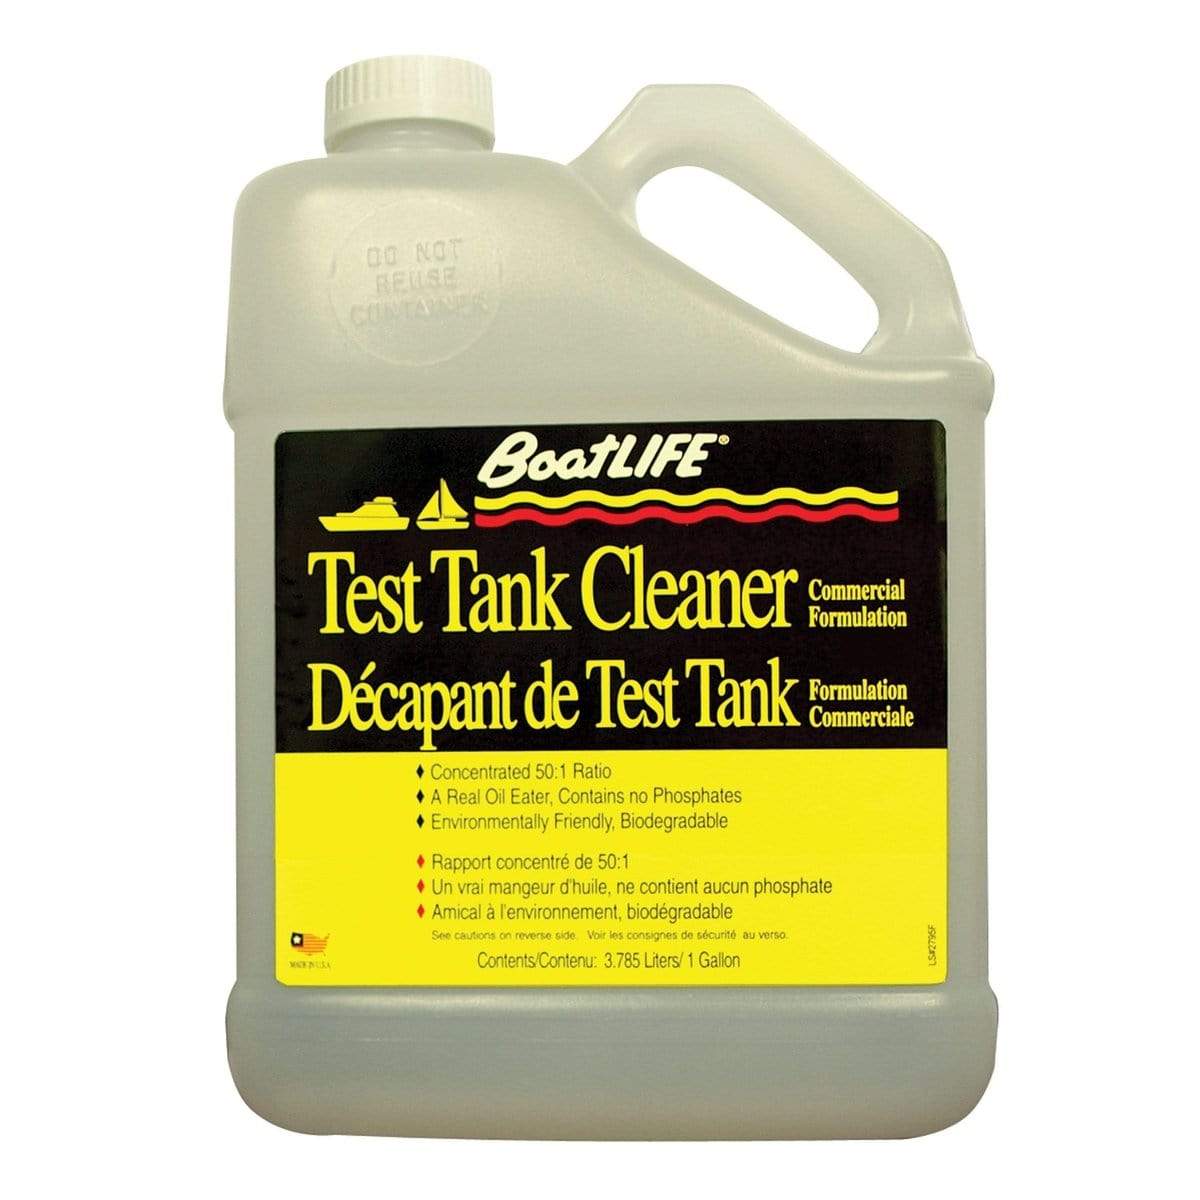 Boatlife Qualifies for Free Shipping BoatLIFE Test Tank Cleaner Gallons #1127